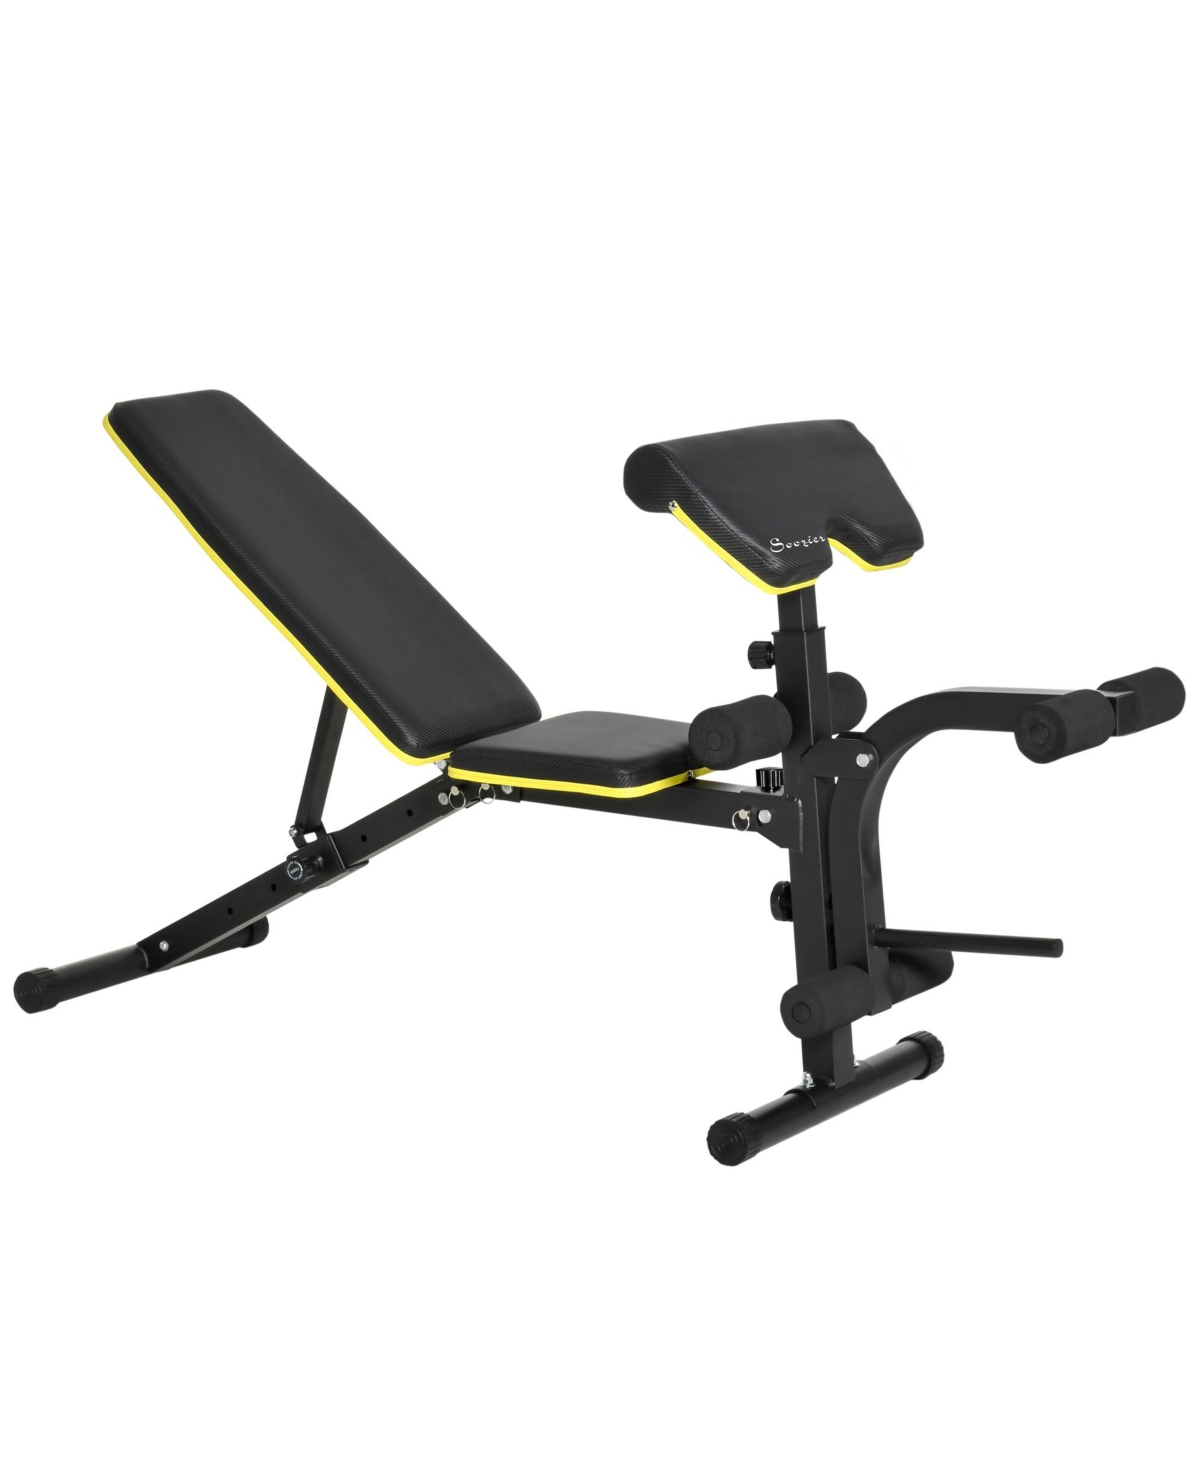 Adjustable Workout Bench with Leg Extension and Curl, Ergonomic Foam, Dumbbell Bench for Home, Comfortable Padding, Exercise Bench Home Gym Eq